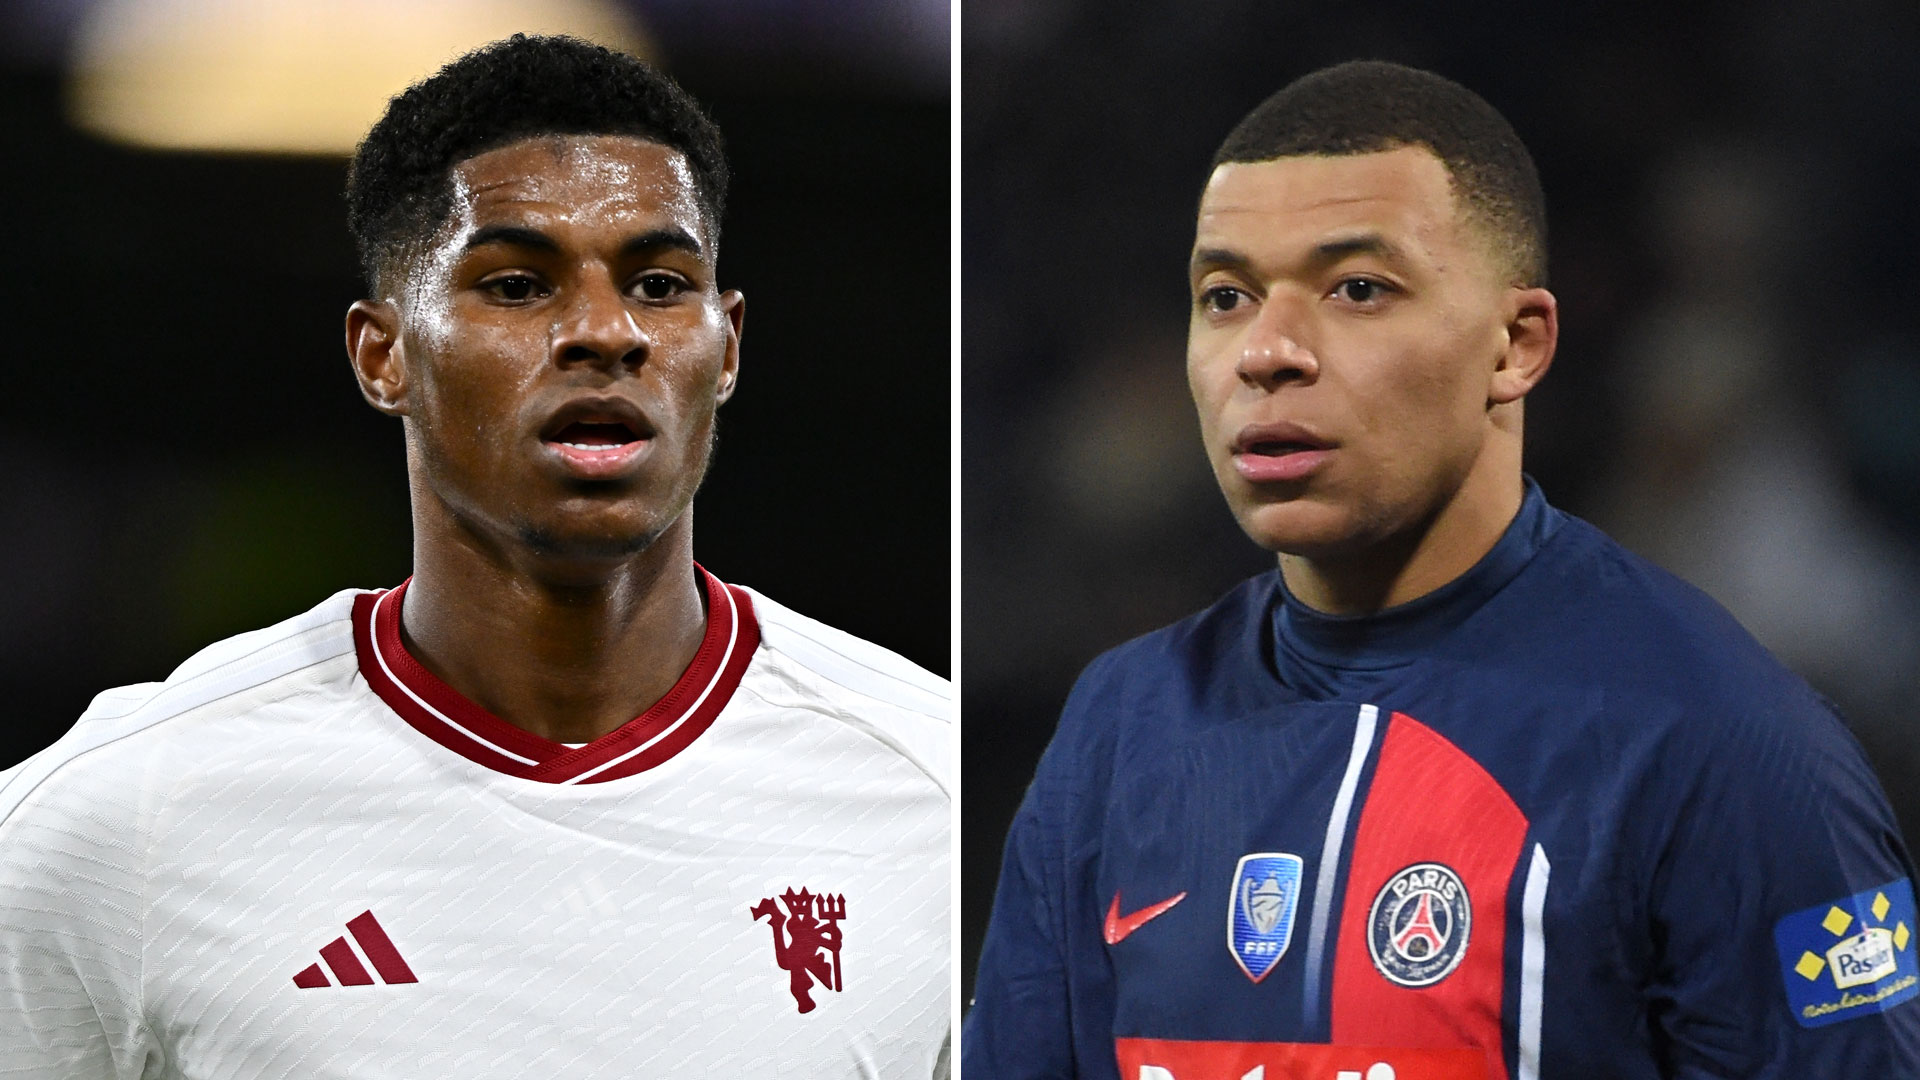 PSG is ready to offer Marcus Rasford huge money to replace Kylian Mbappe this summer